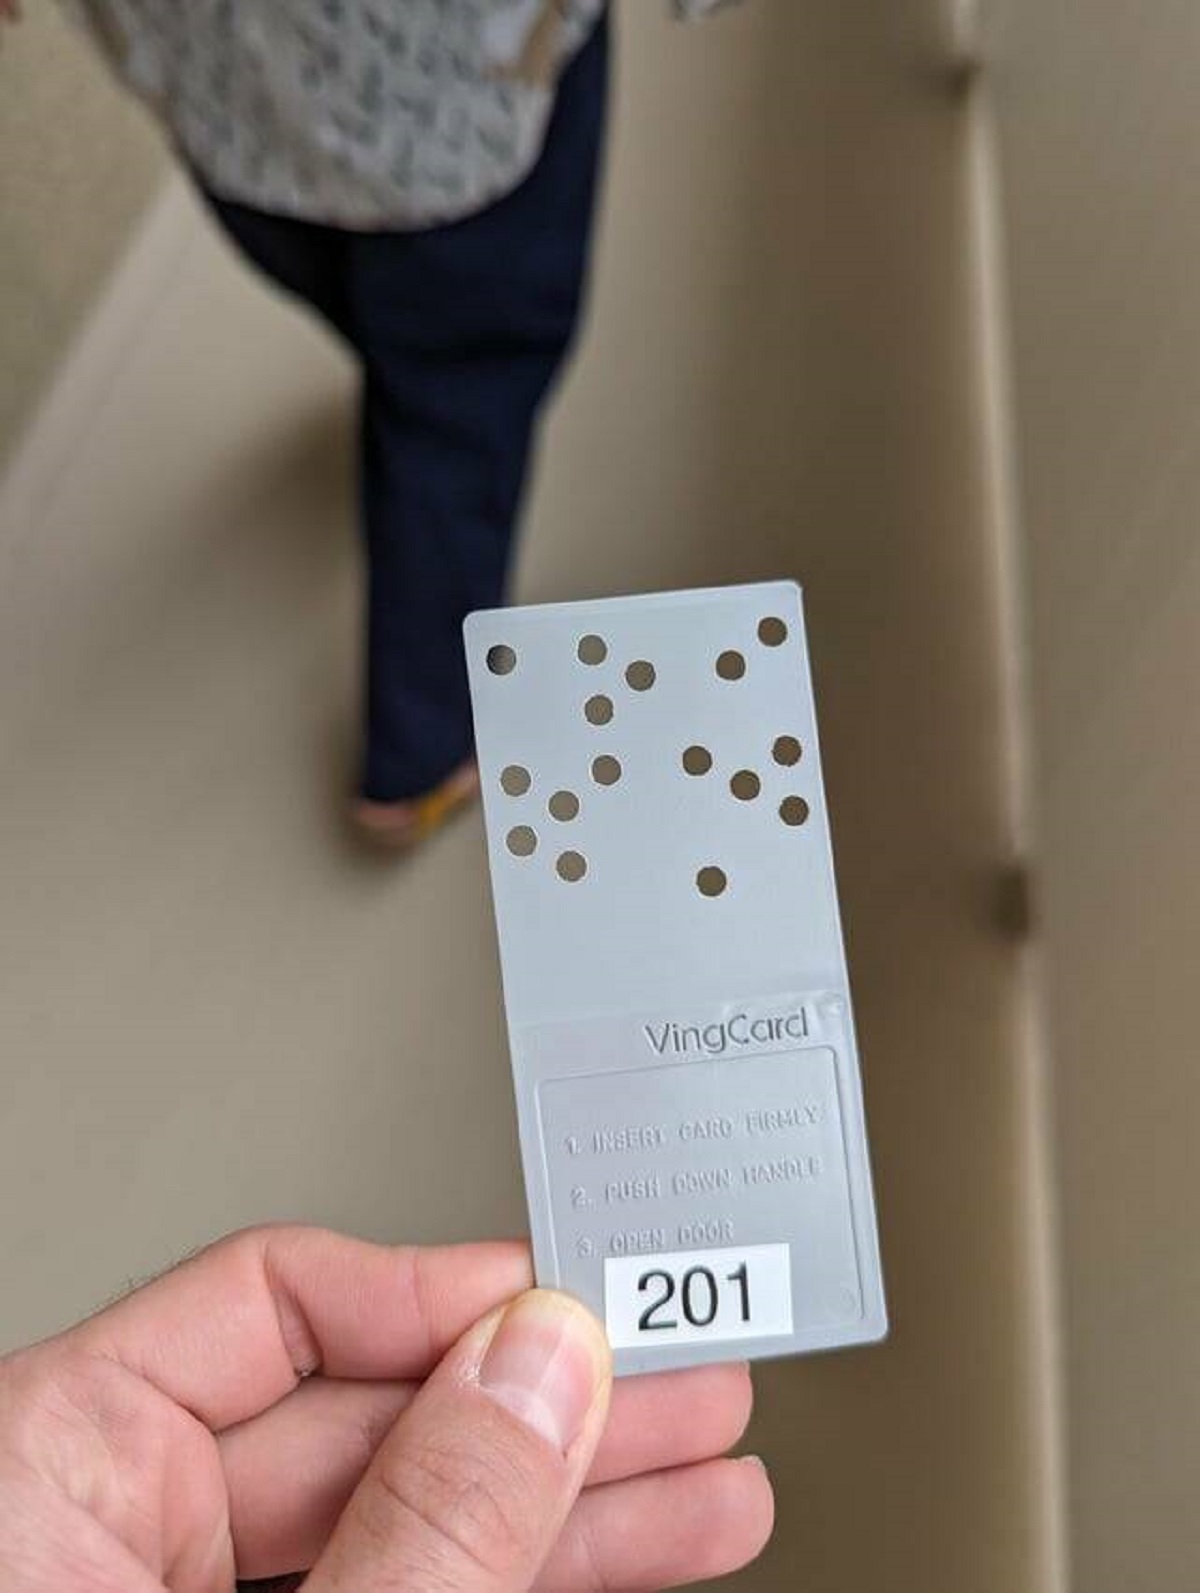 "My hotel uses a punch card room key"